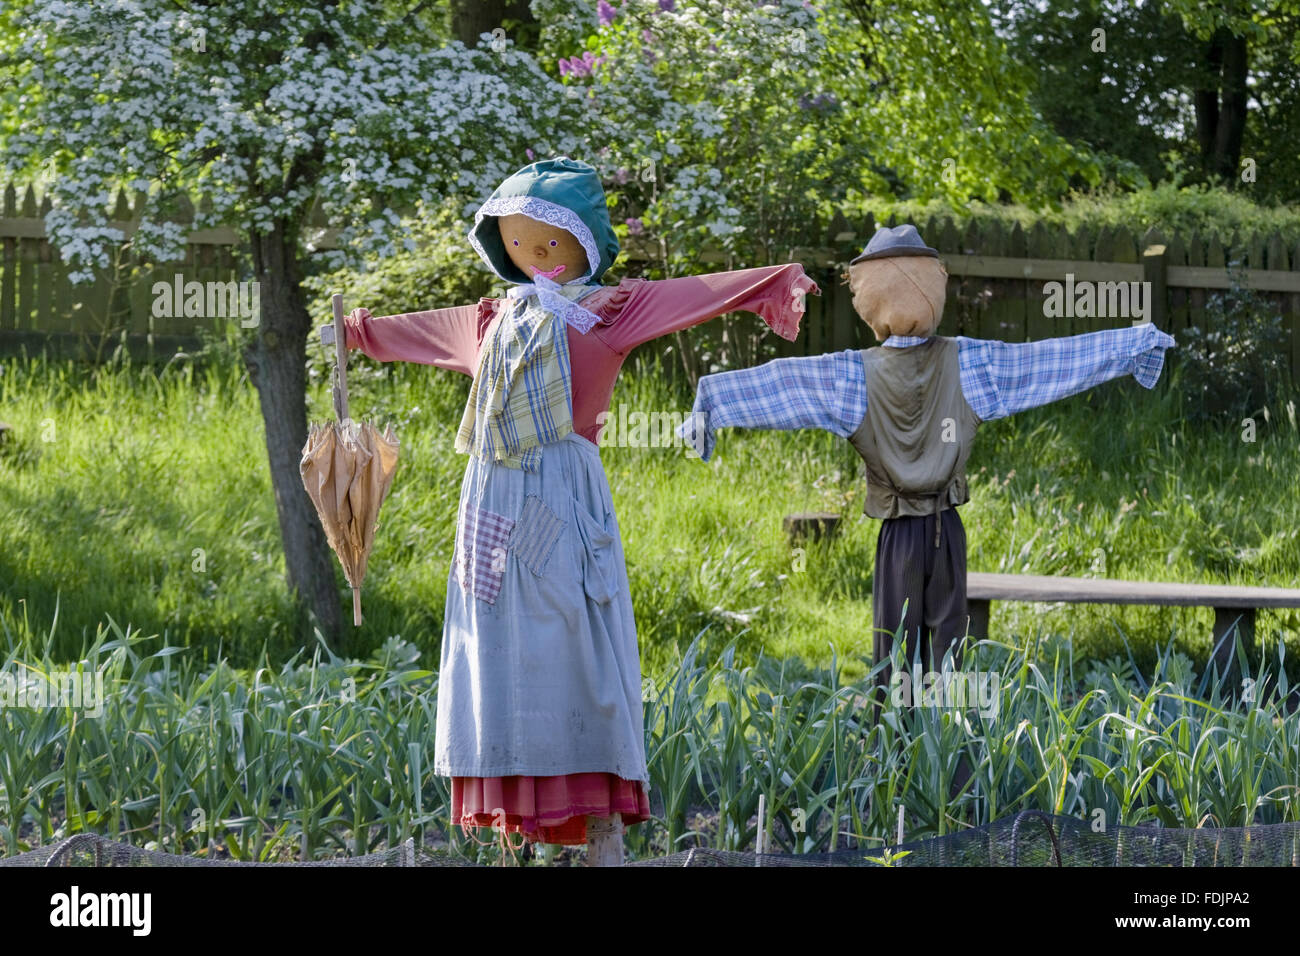 Scarecrows in the Apprentice House garden in May which is part of the Quarry Bank Mill and Styal Estate, Wilmslow, Cheshire. Pauper children lived in the Apprentice House and worked in the cotton mill in the late eighteenth century and were able to grow t Stock Photo